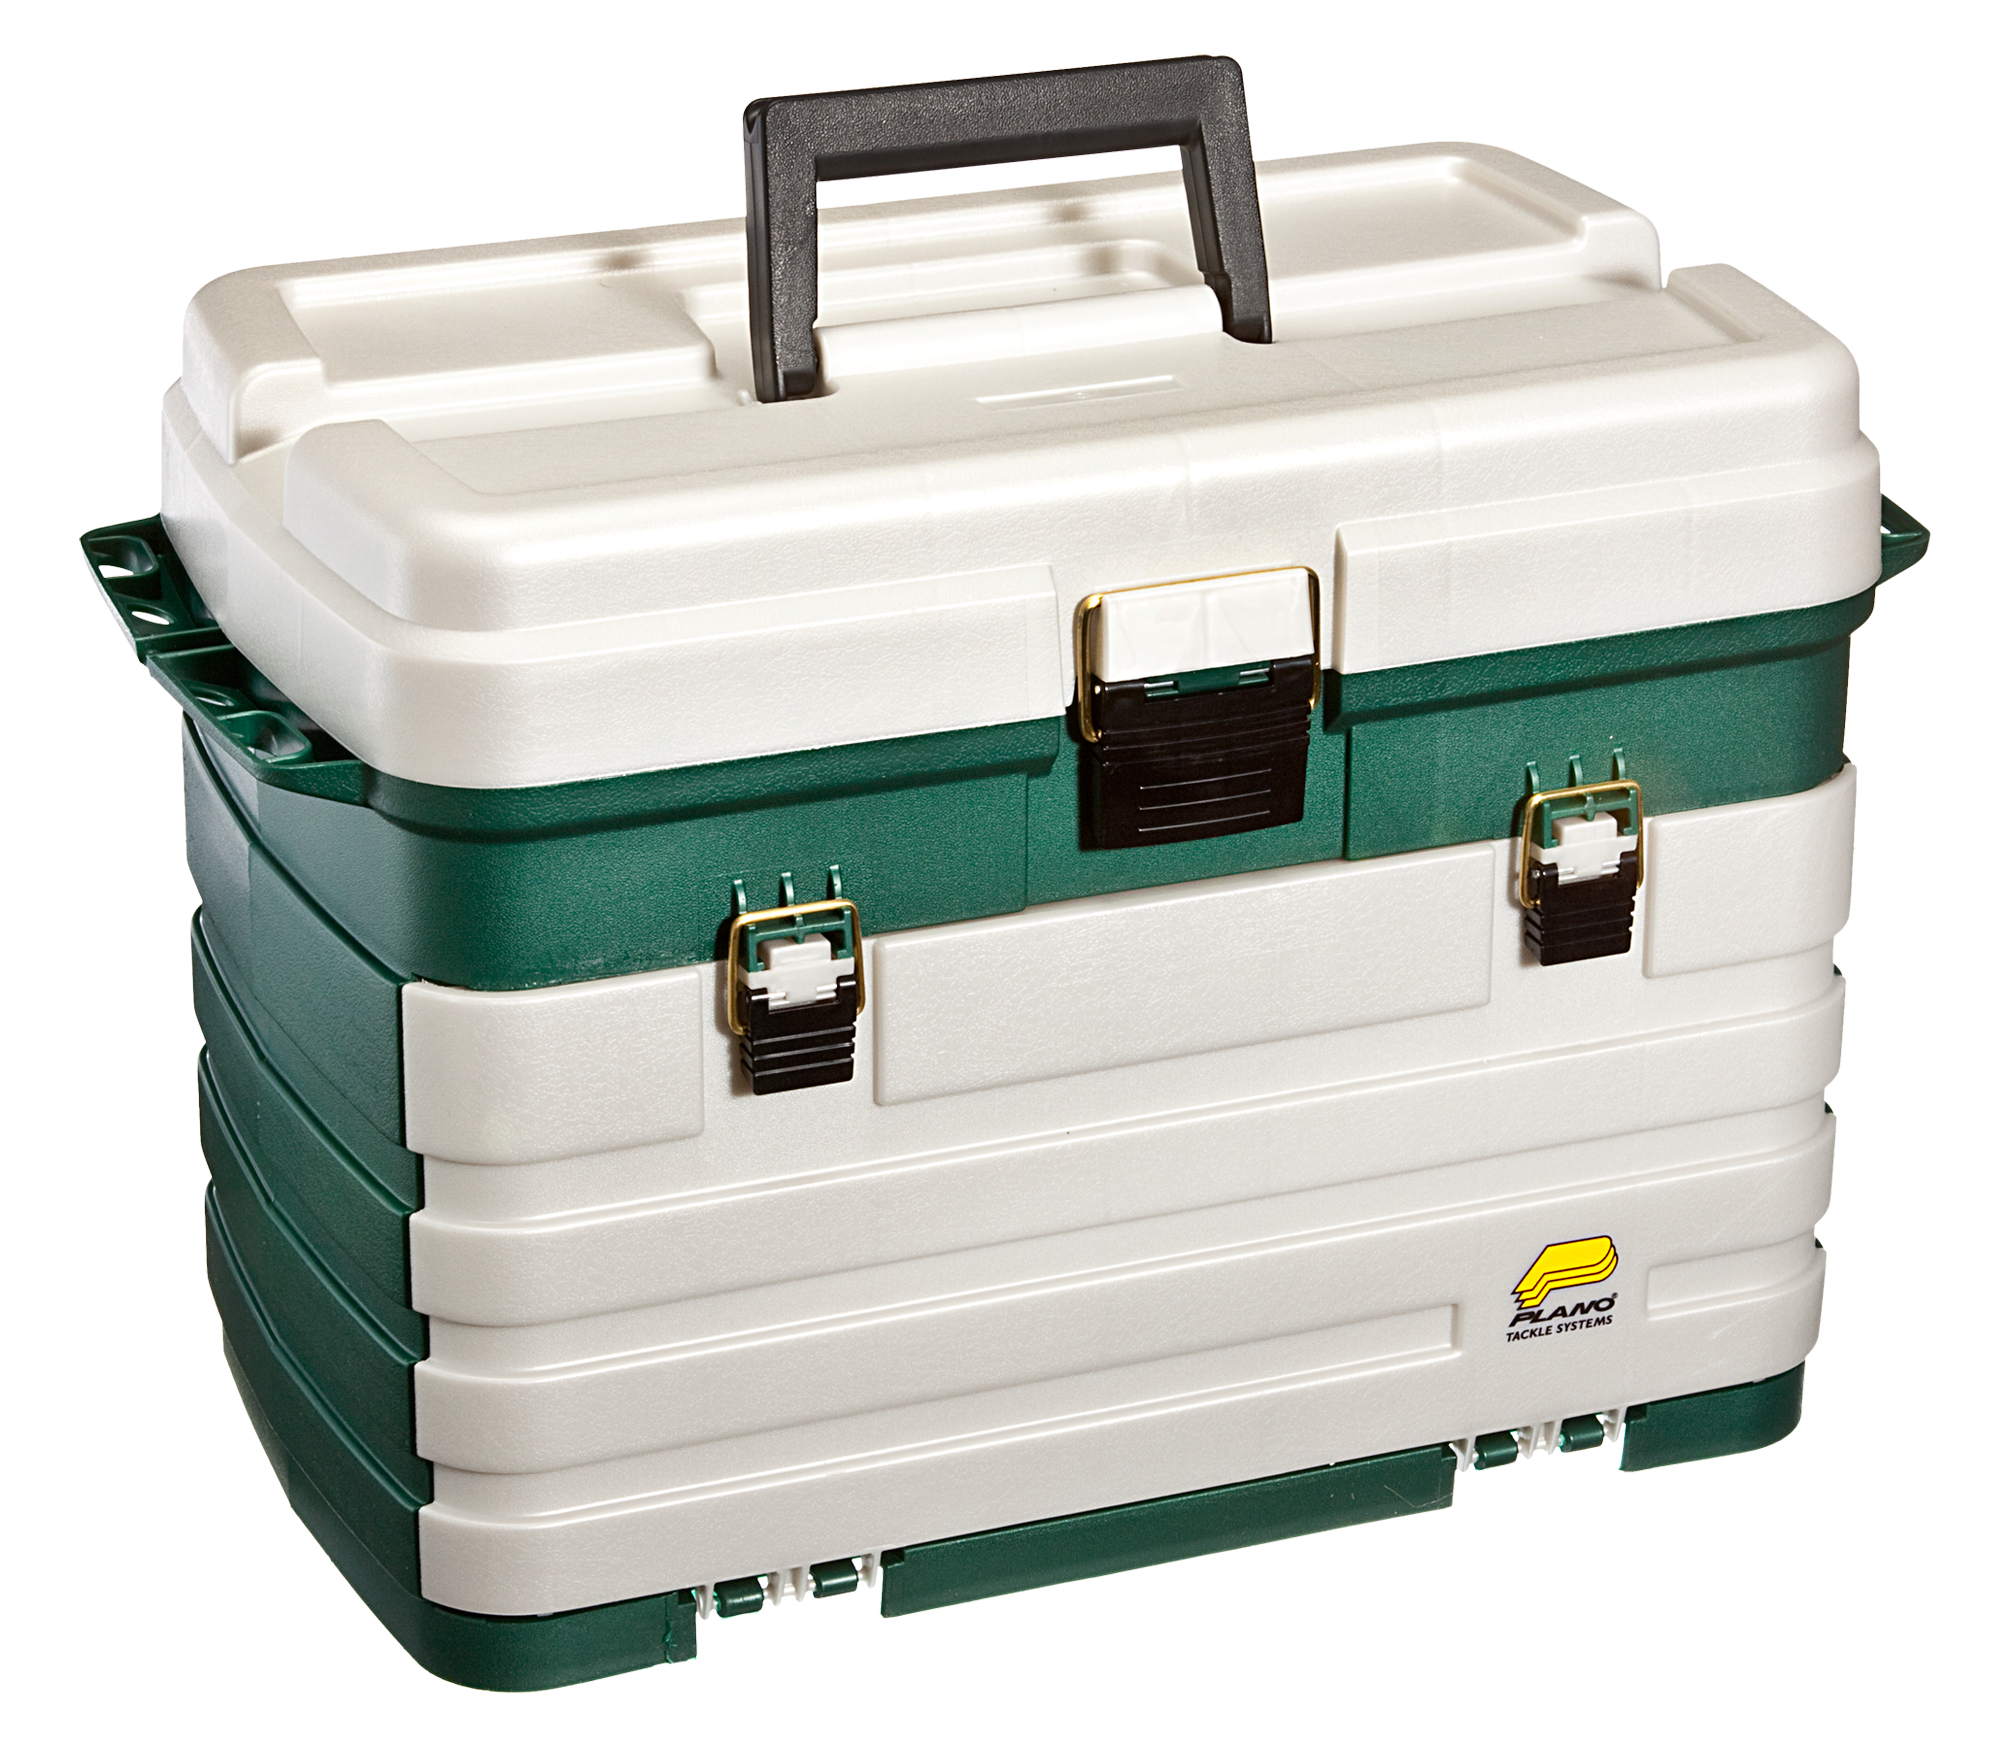 Plano 758-005 Tackle Box 4-Drawer System